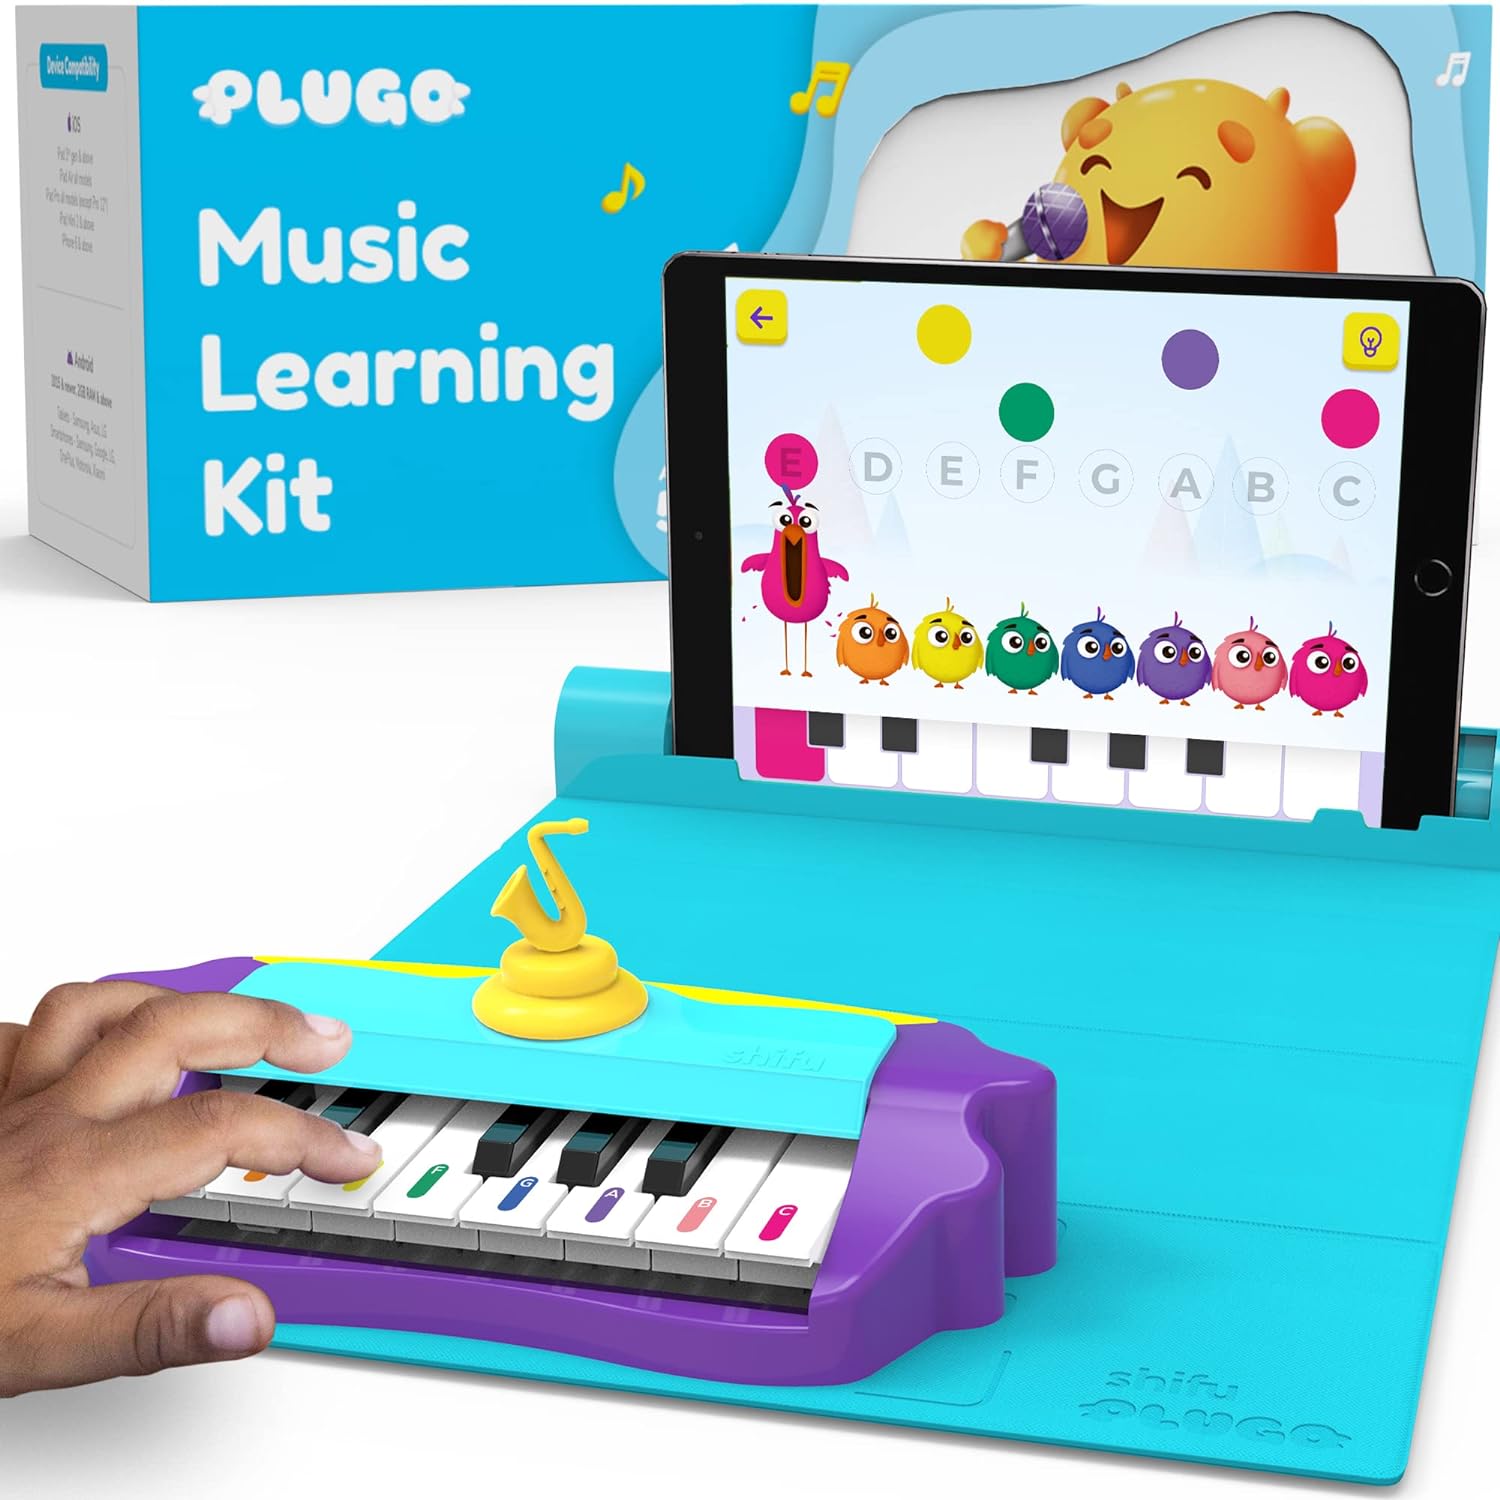 Shifu Playshifu Plugo Tunes, Piano Learning Kit Musical Stem Toy For Ages 4-10, Educational Music Instruments Gift For Boys & Girls, App Based, Multicolor